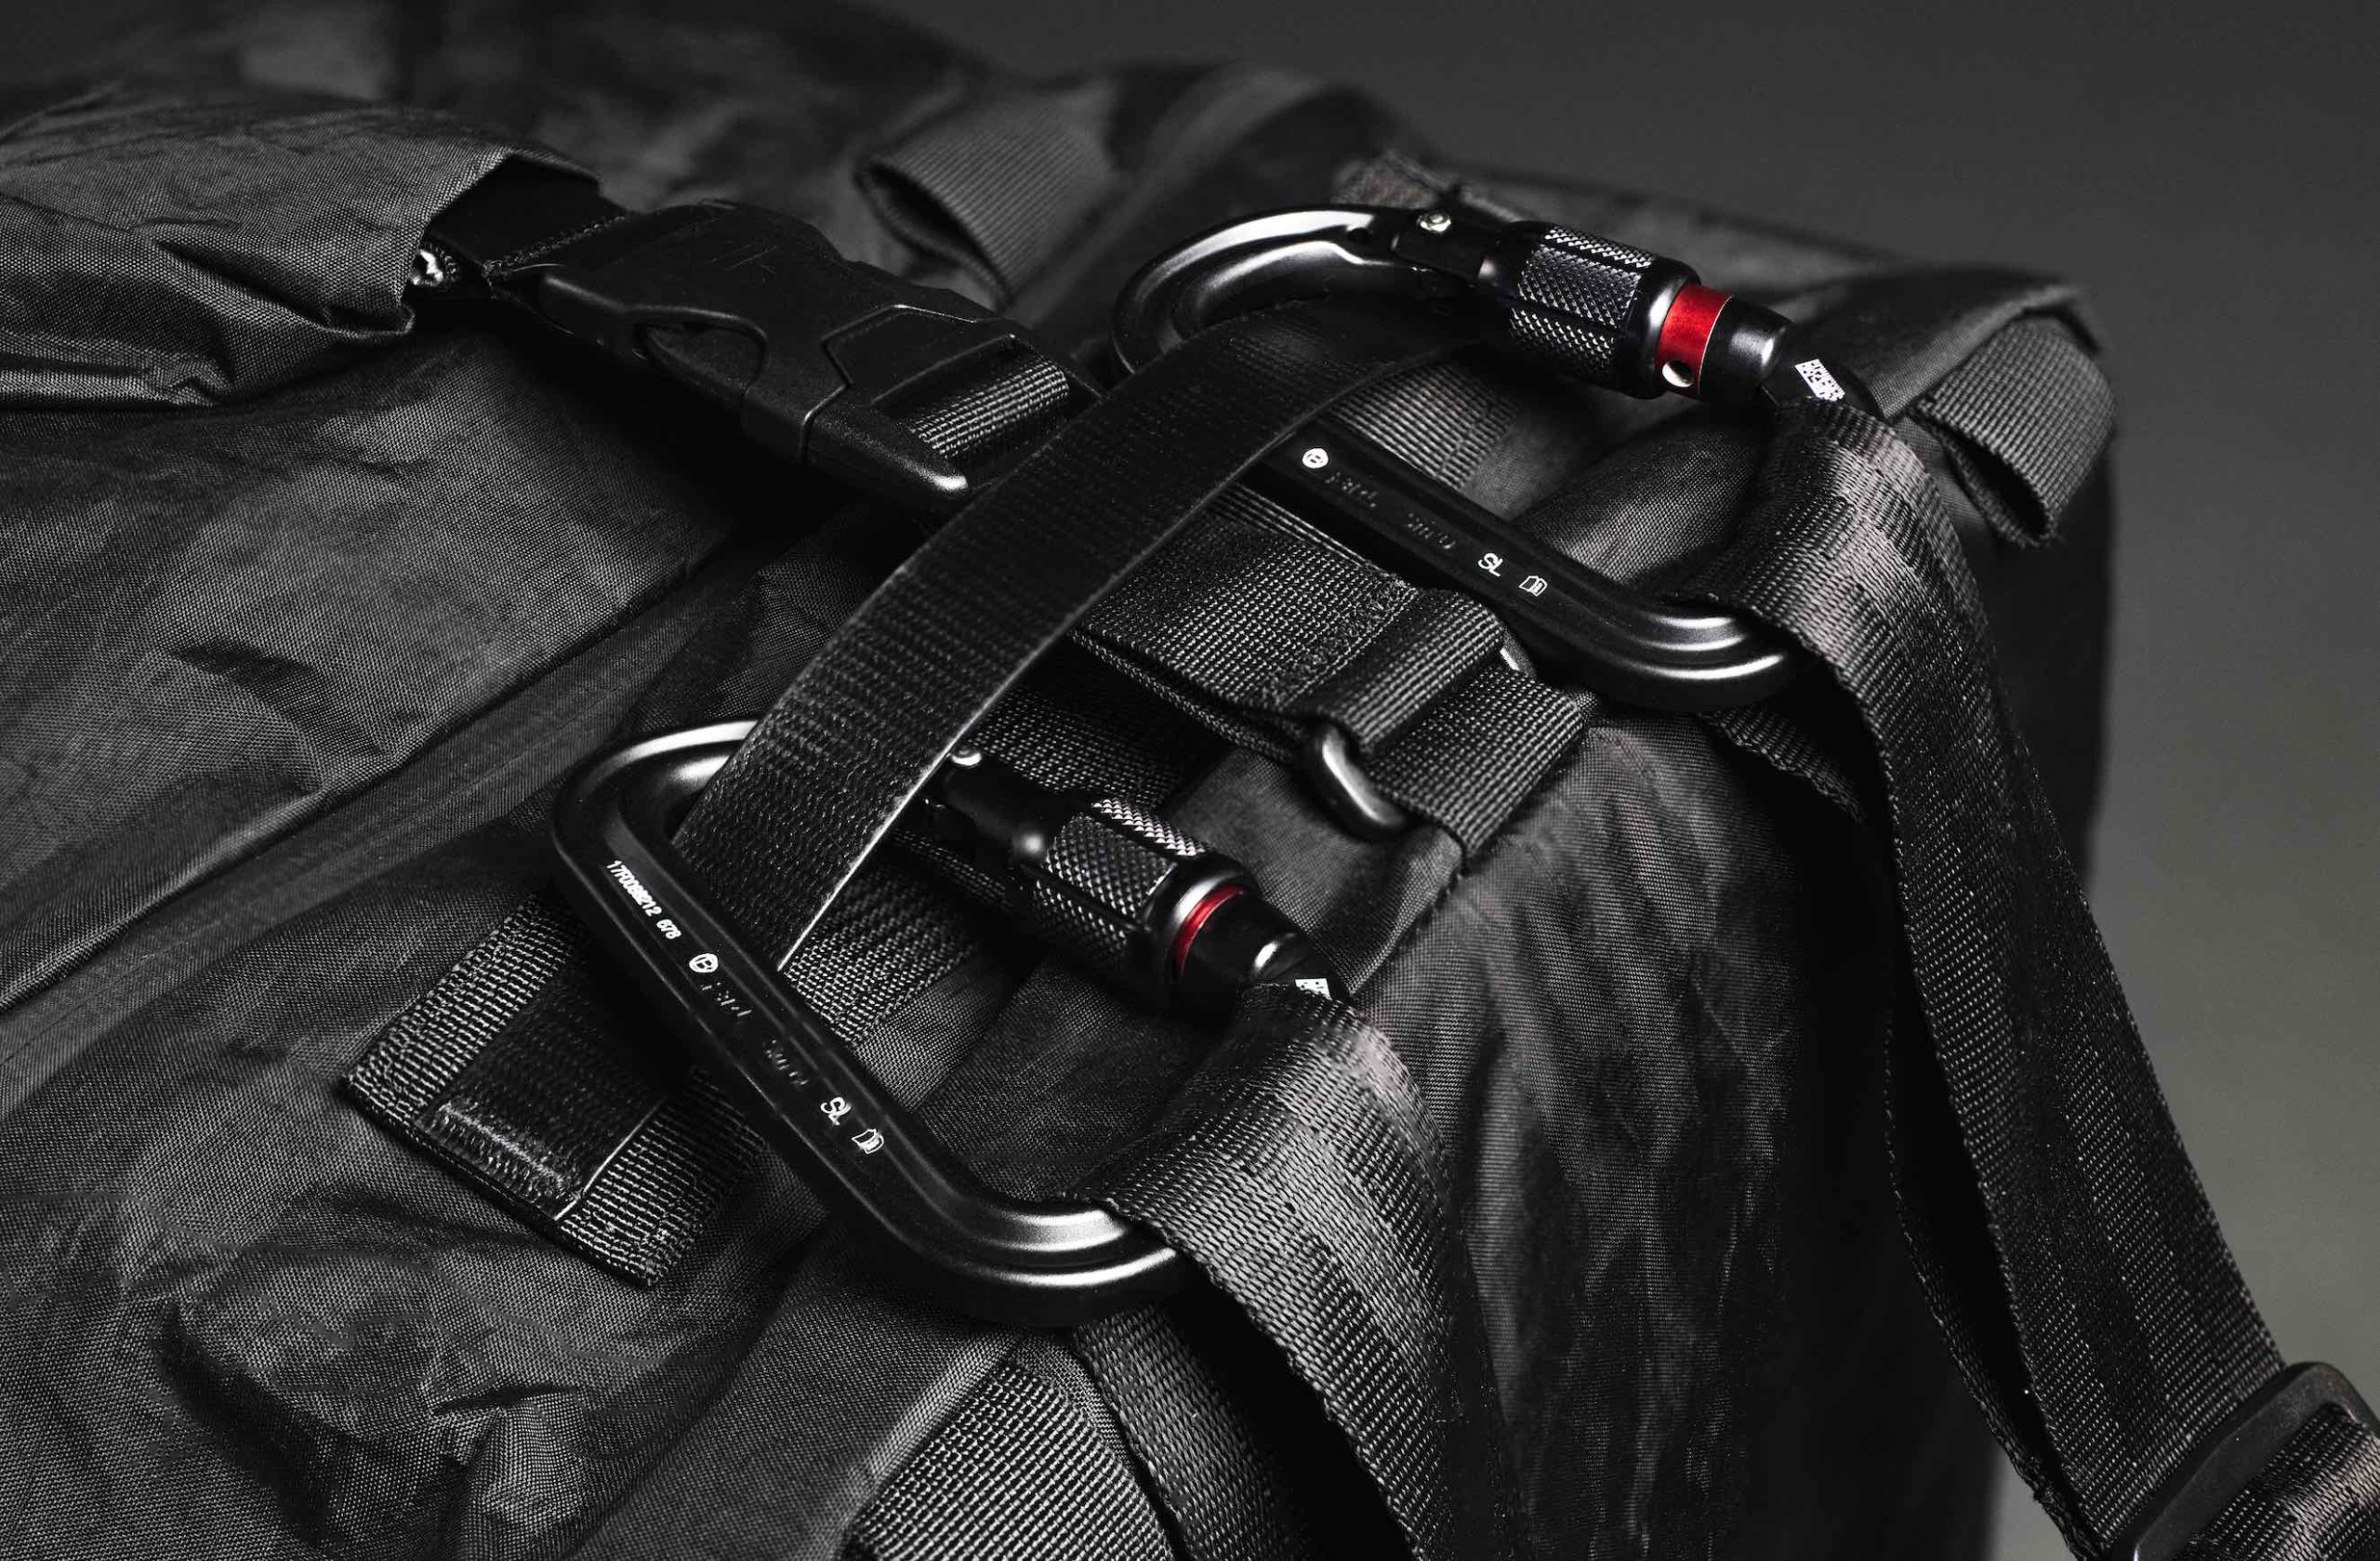 Closeup view of fasteners on black bag